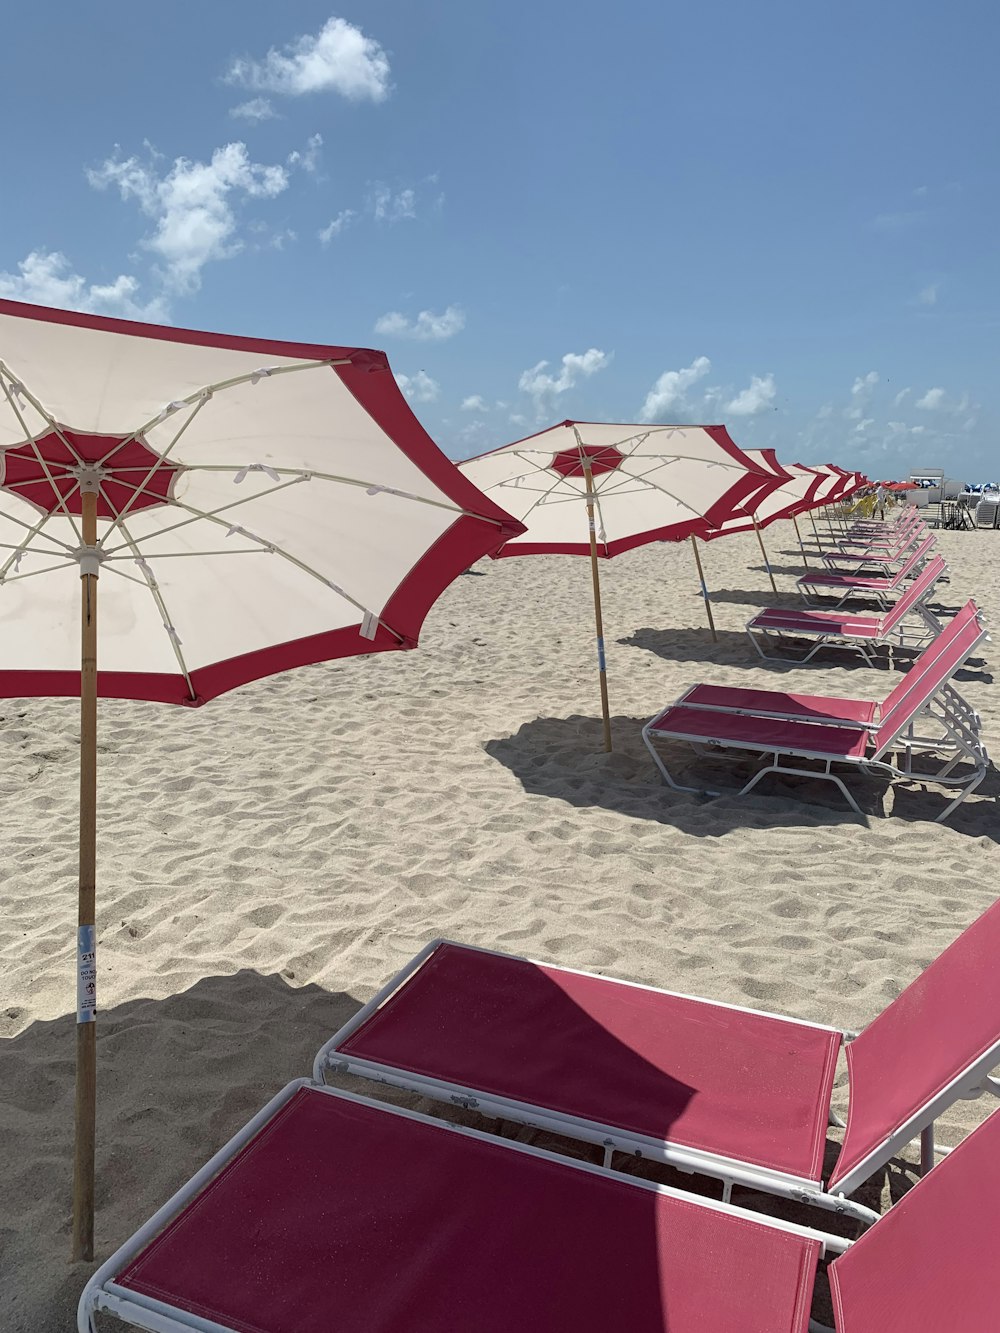 red and white umbrella on beach during daytime